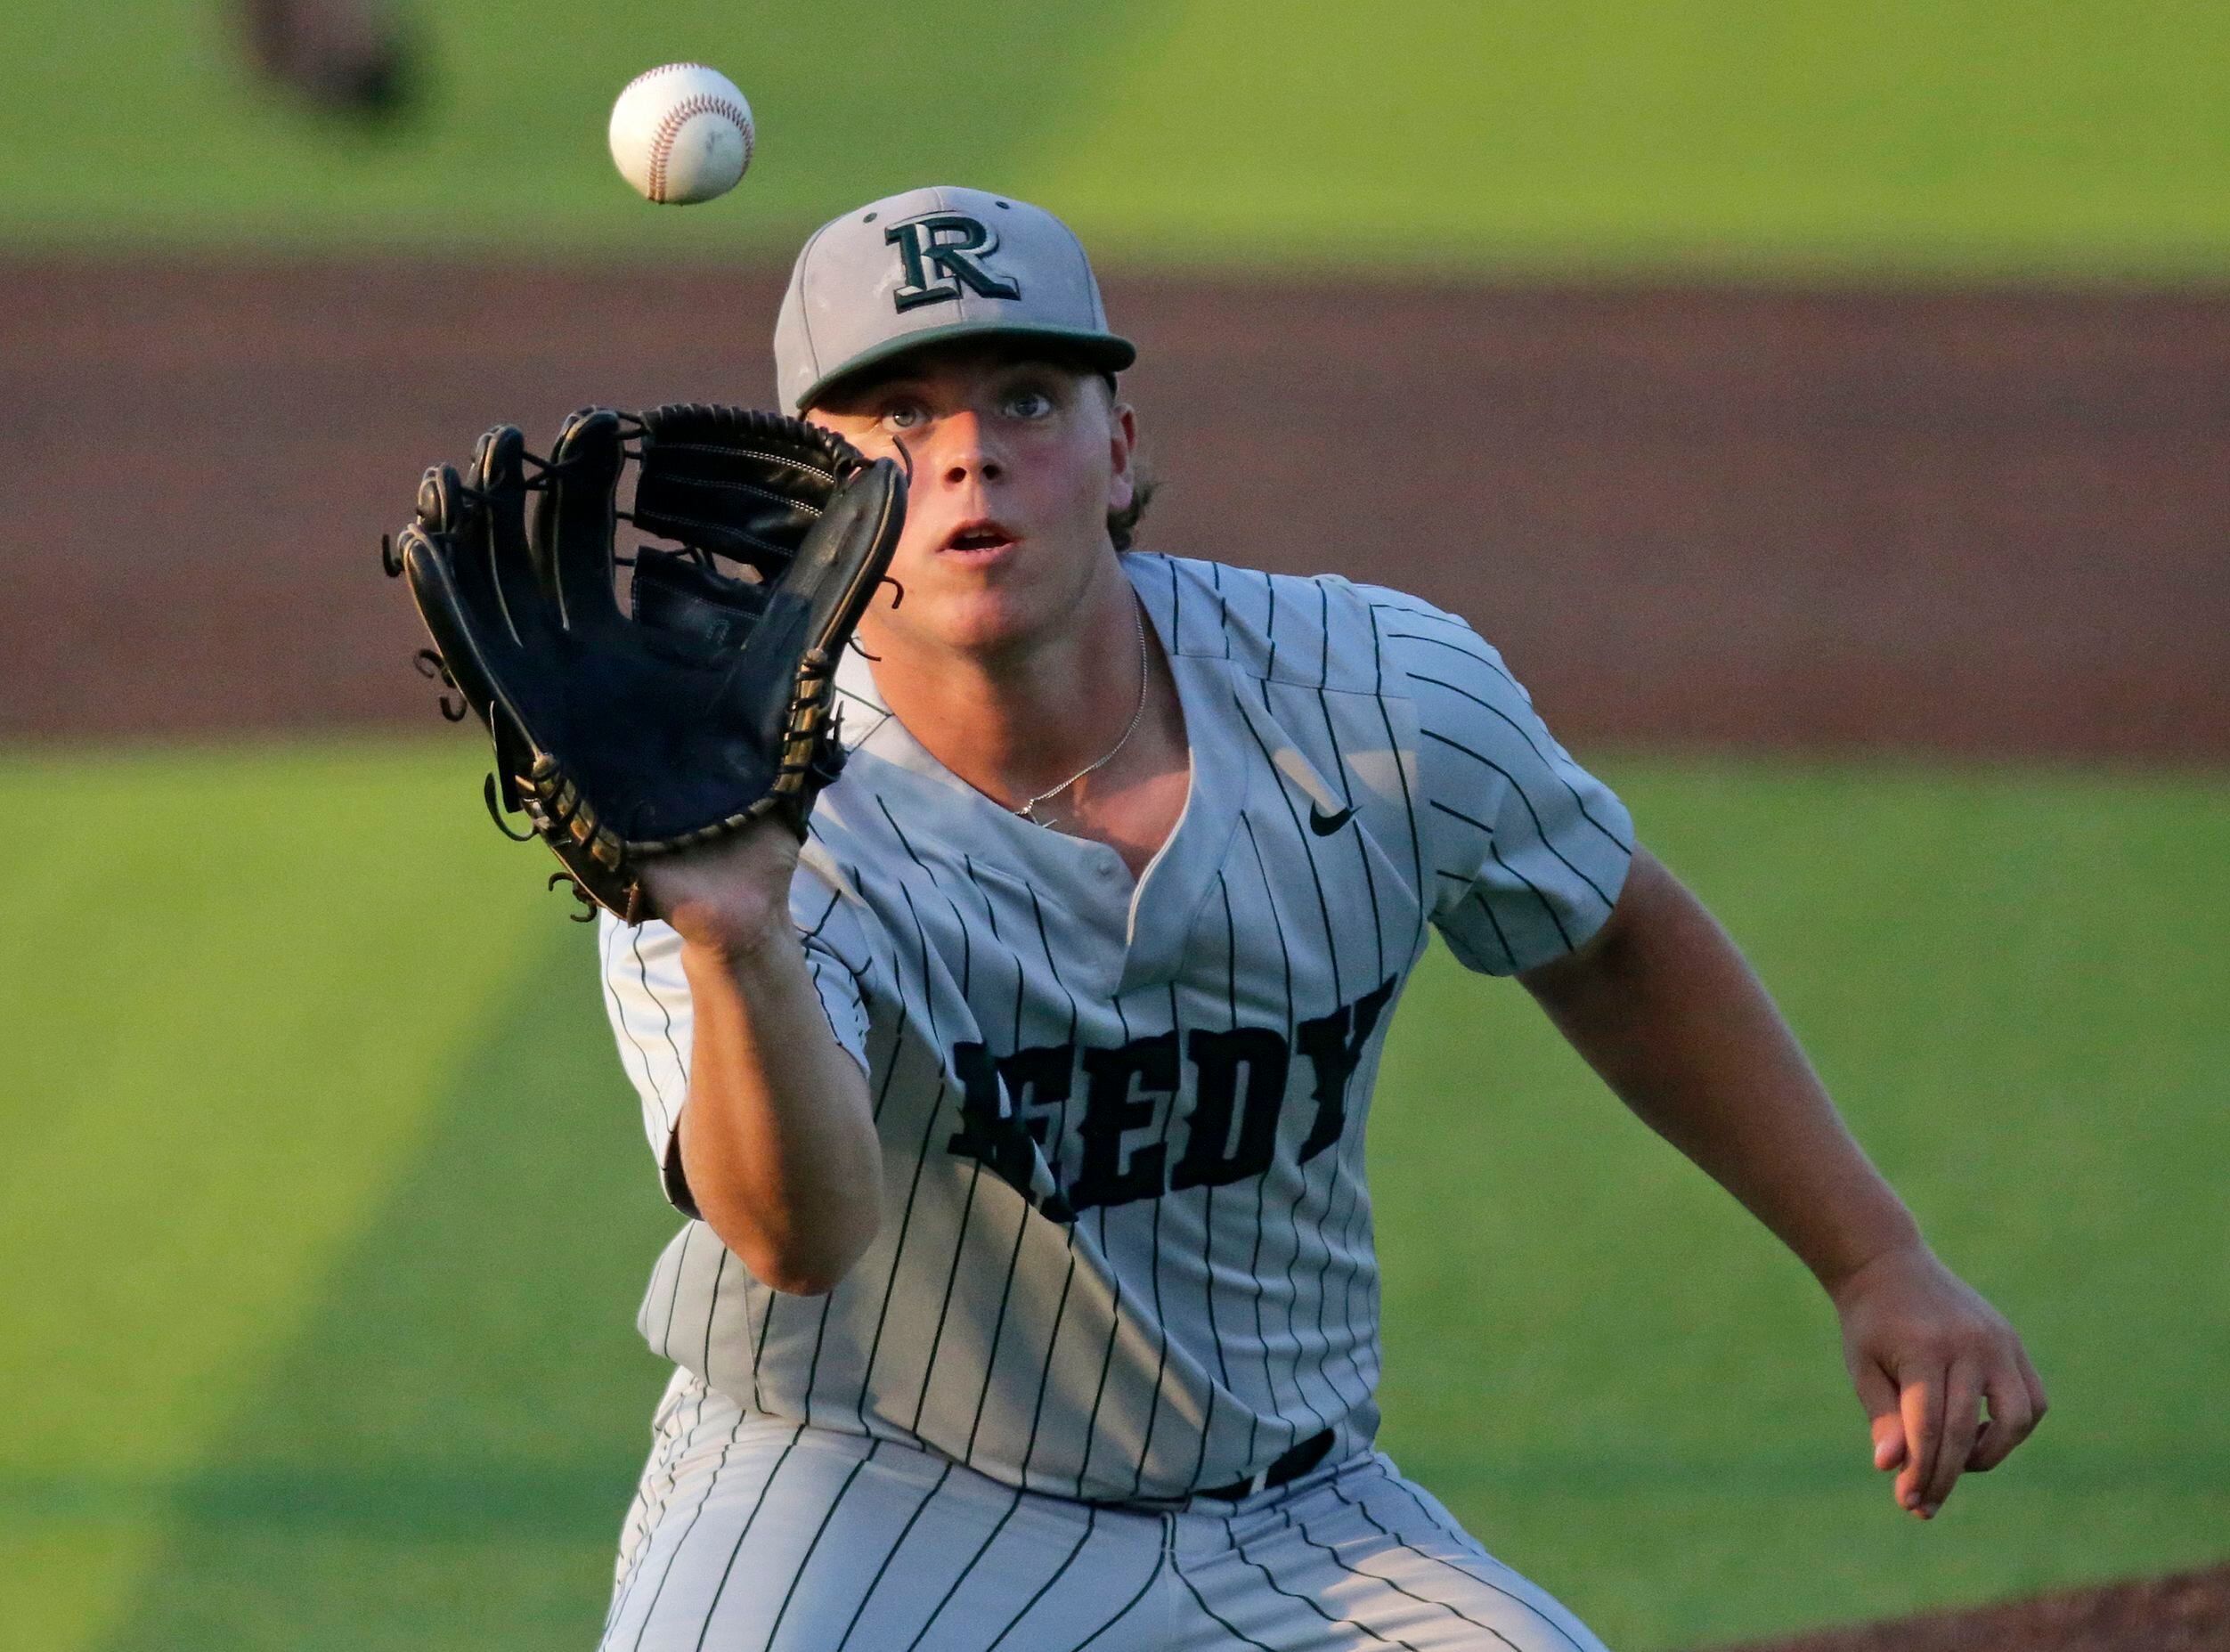 Reedy High School pitcher Kurtis Margraves (20) fields a high bounce at the mound in the...